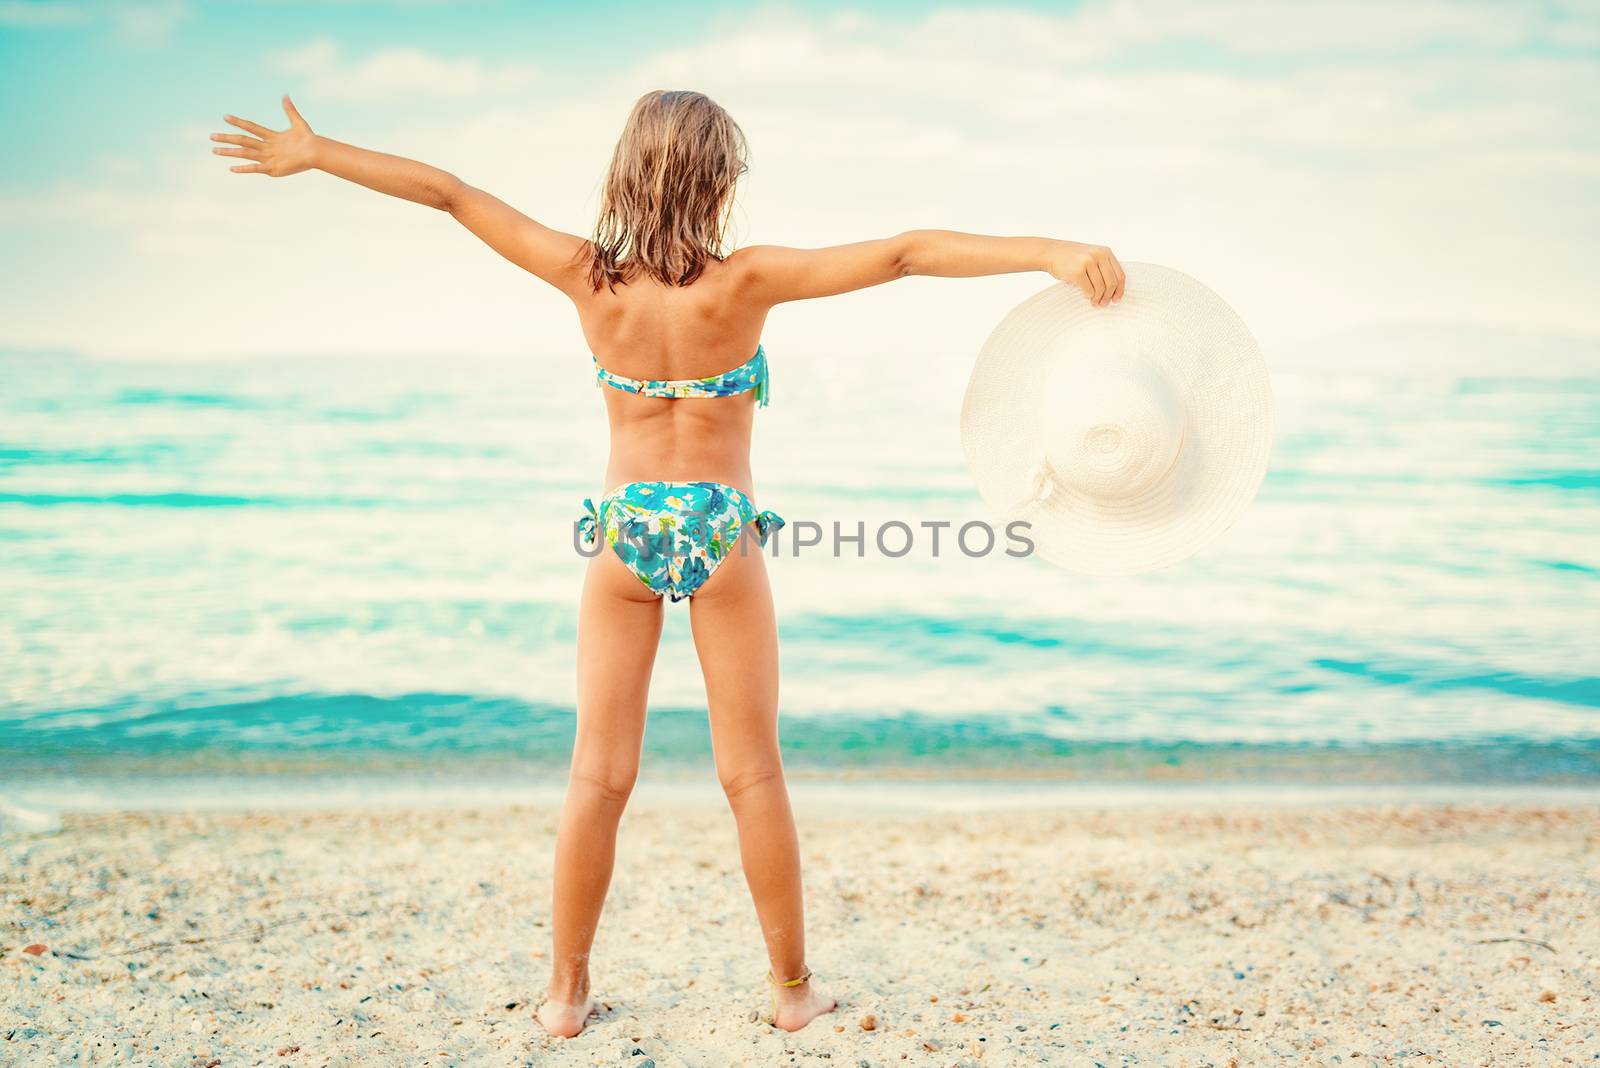 Little Girl On The Beach by MilanMarkovic78